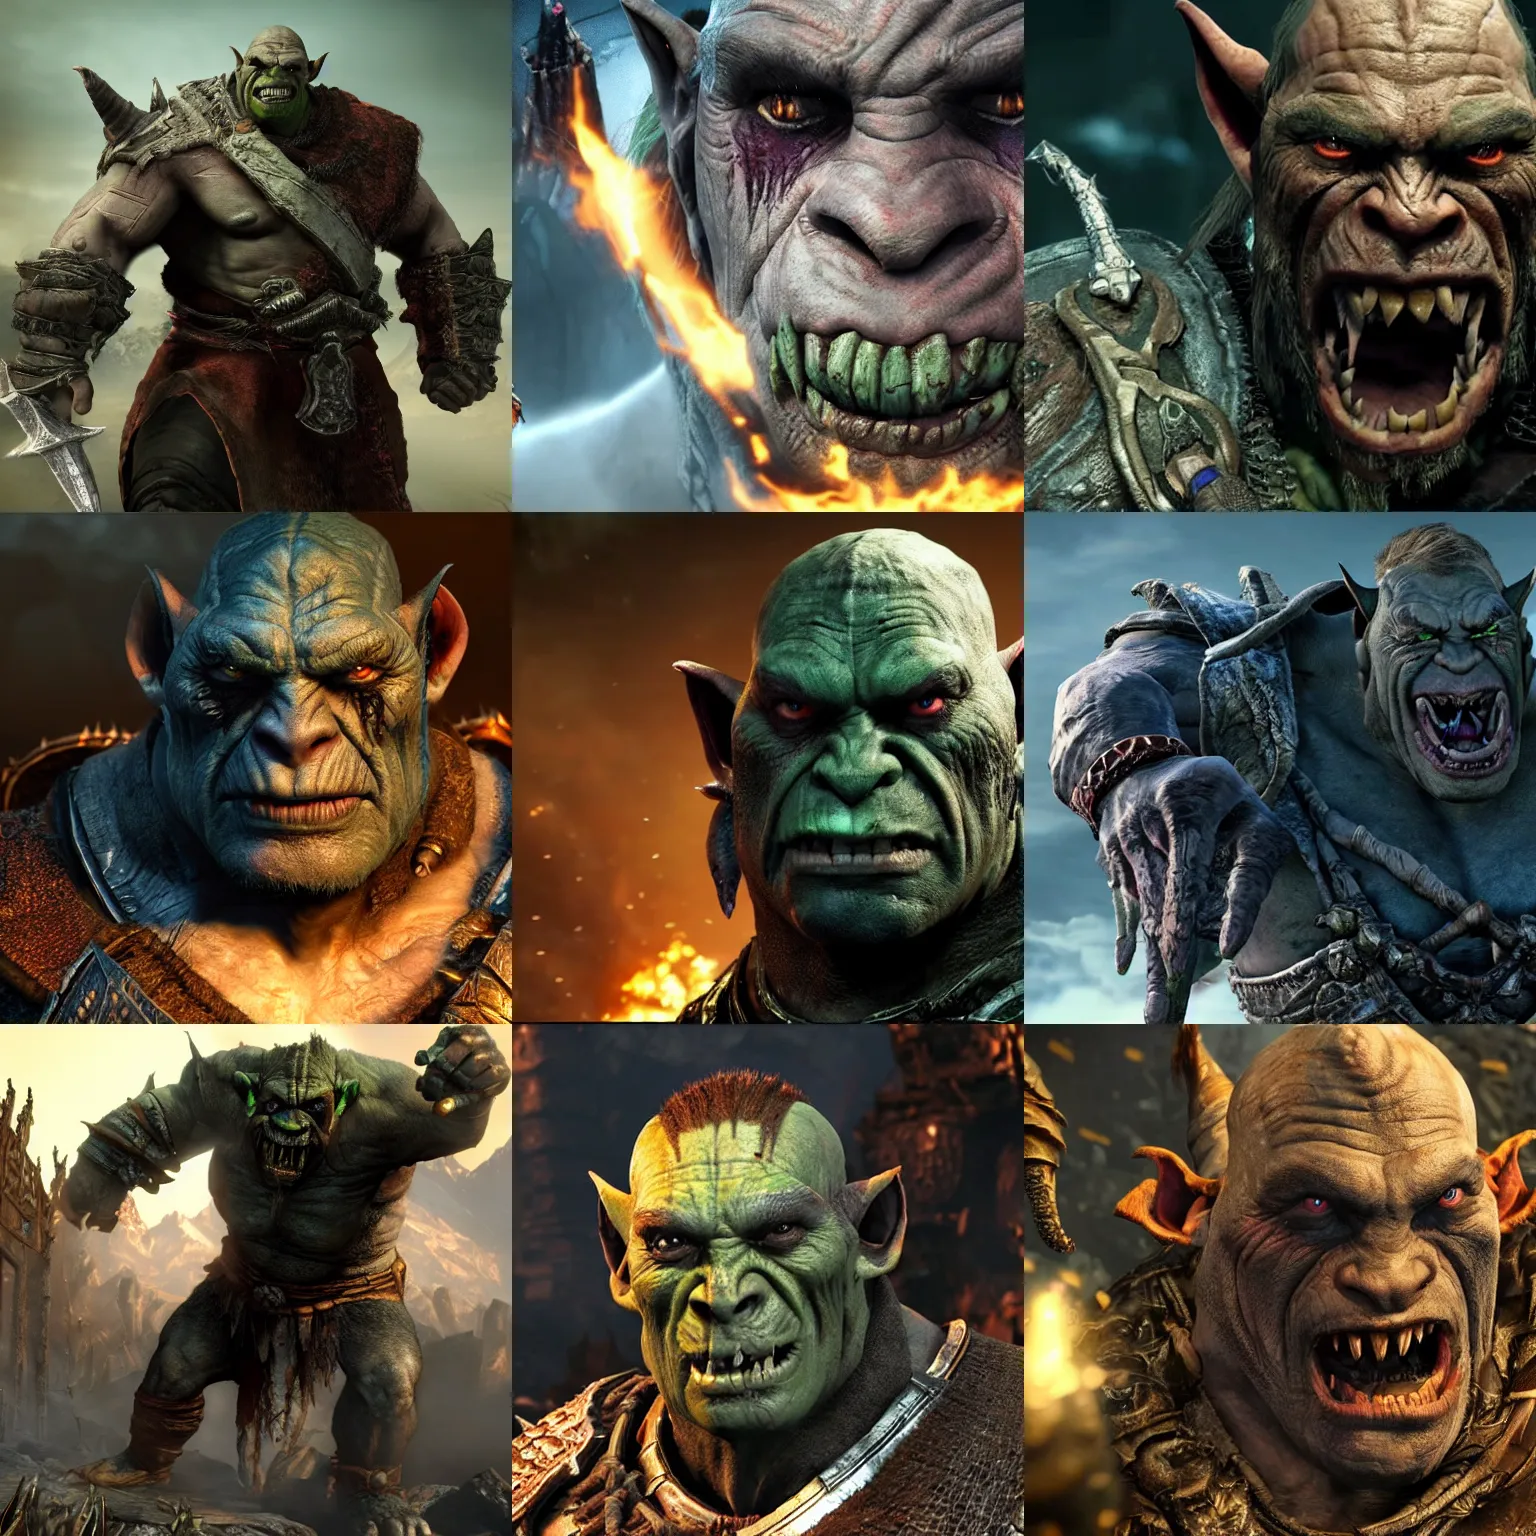 Prompt: The ugliest orc in the game Shadow of War